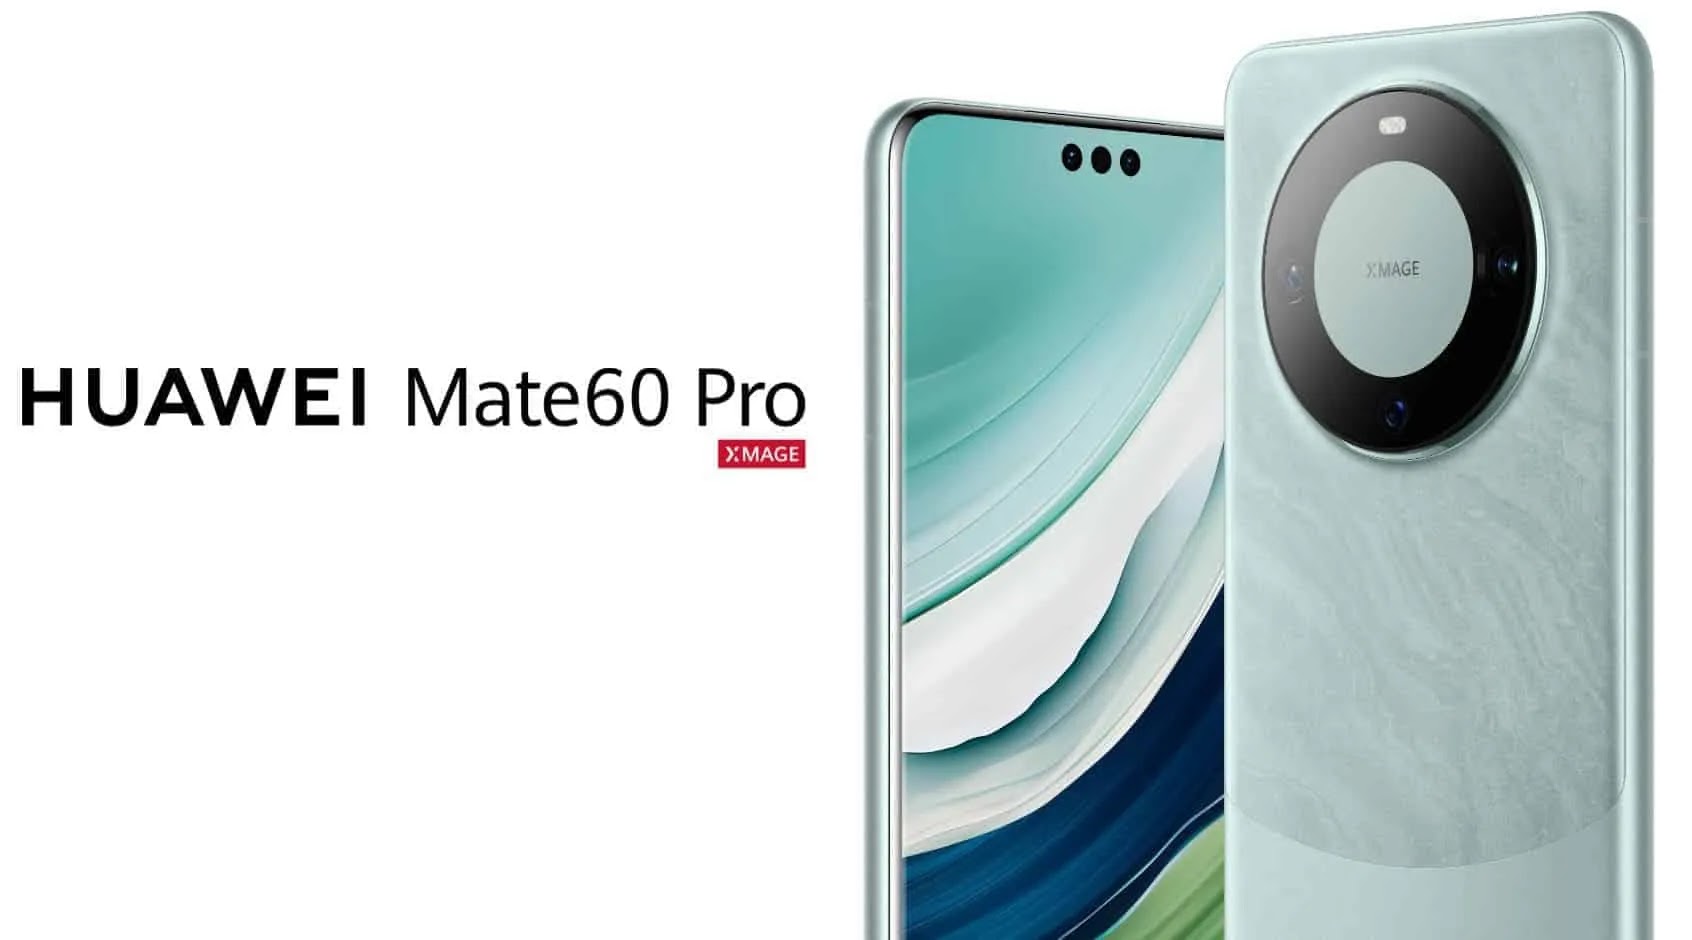 USA Finds Huawei Mate 60 Pro 'Deeply Concerning